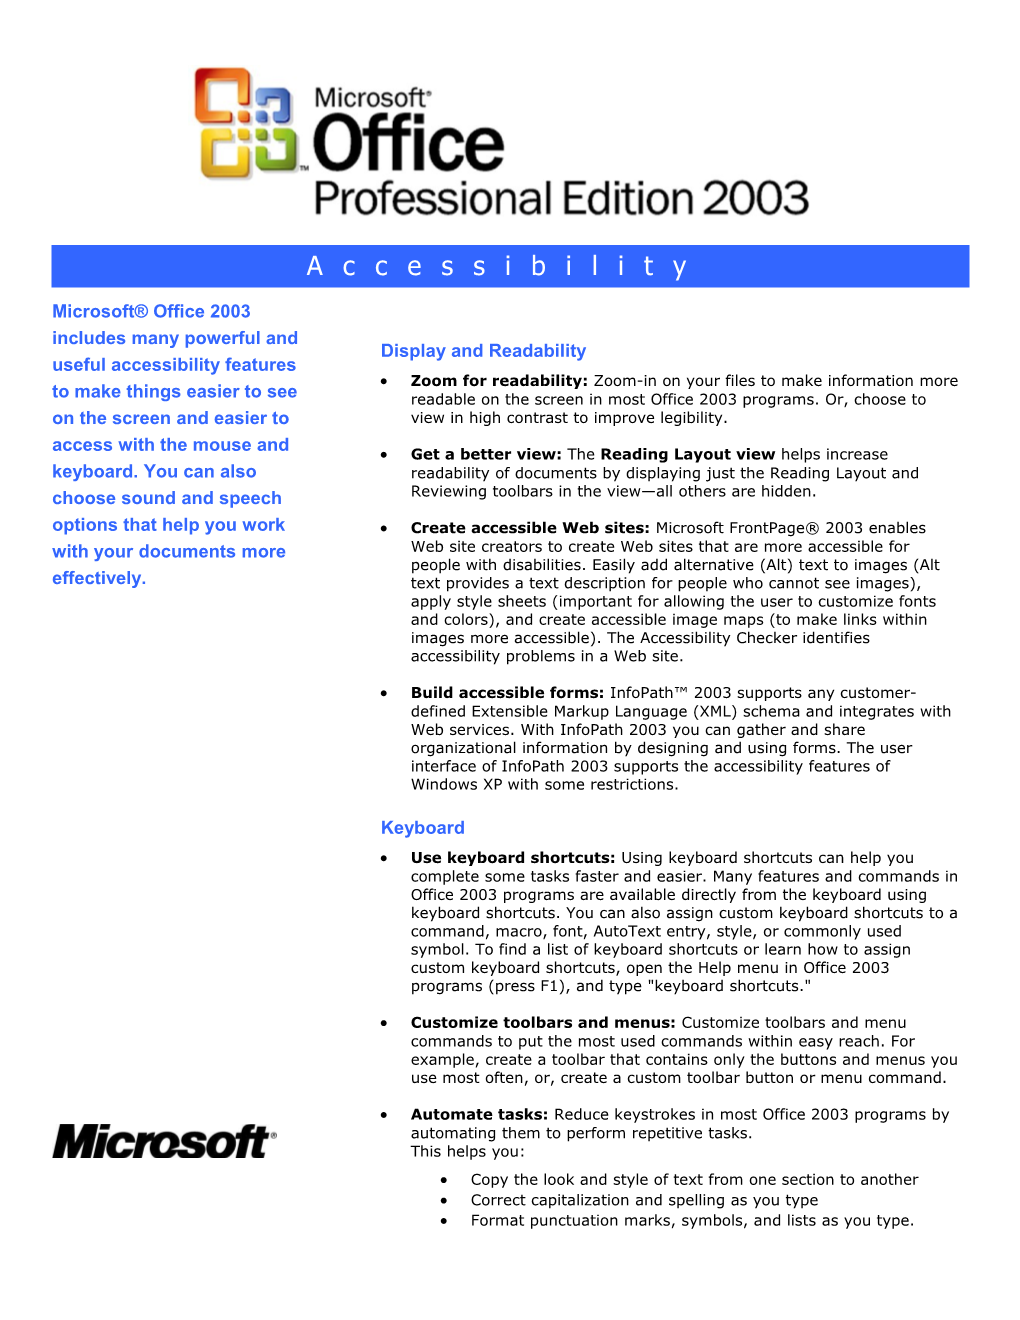 Office 2003 Accessibility Fact Sheet